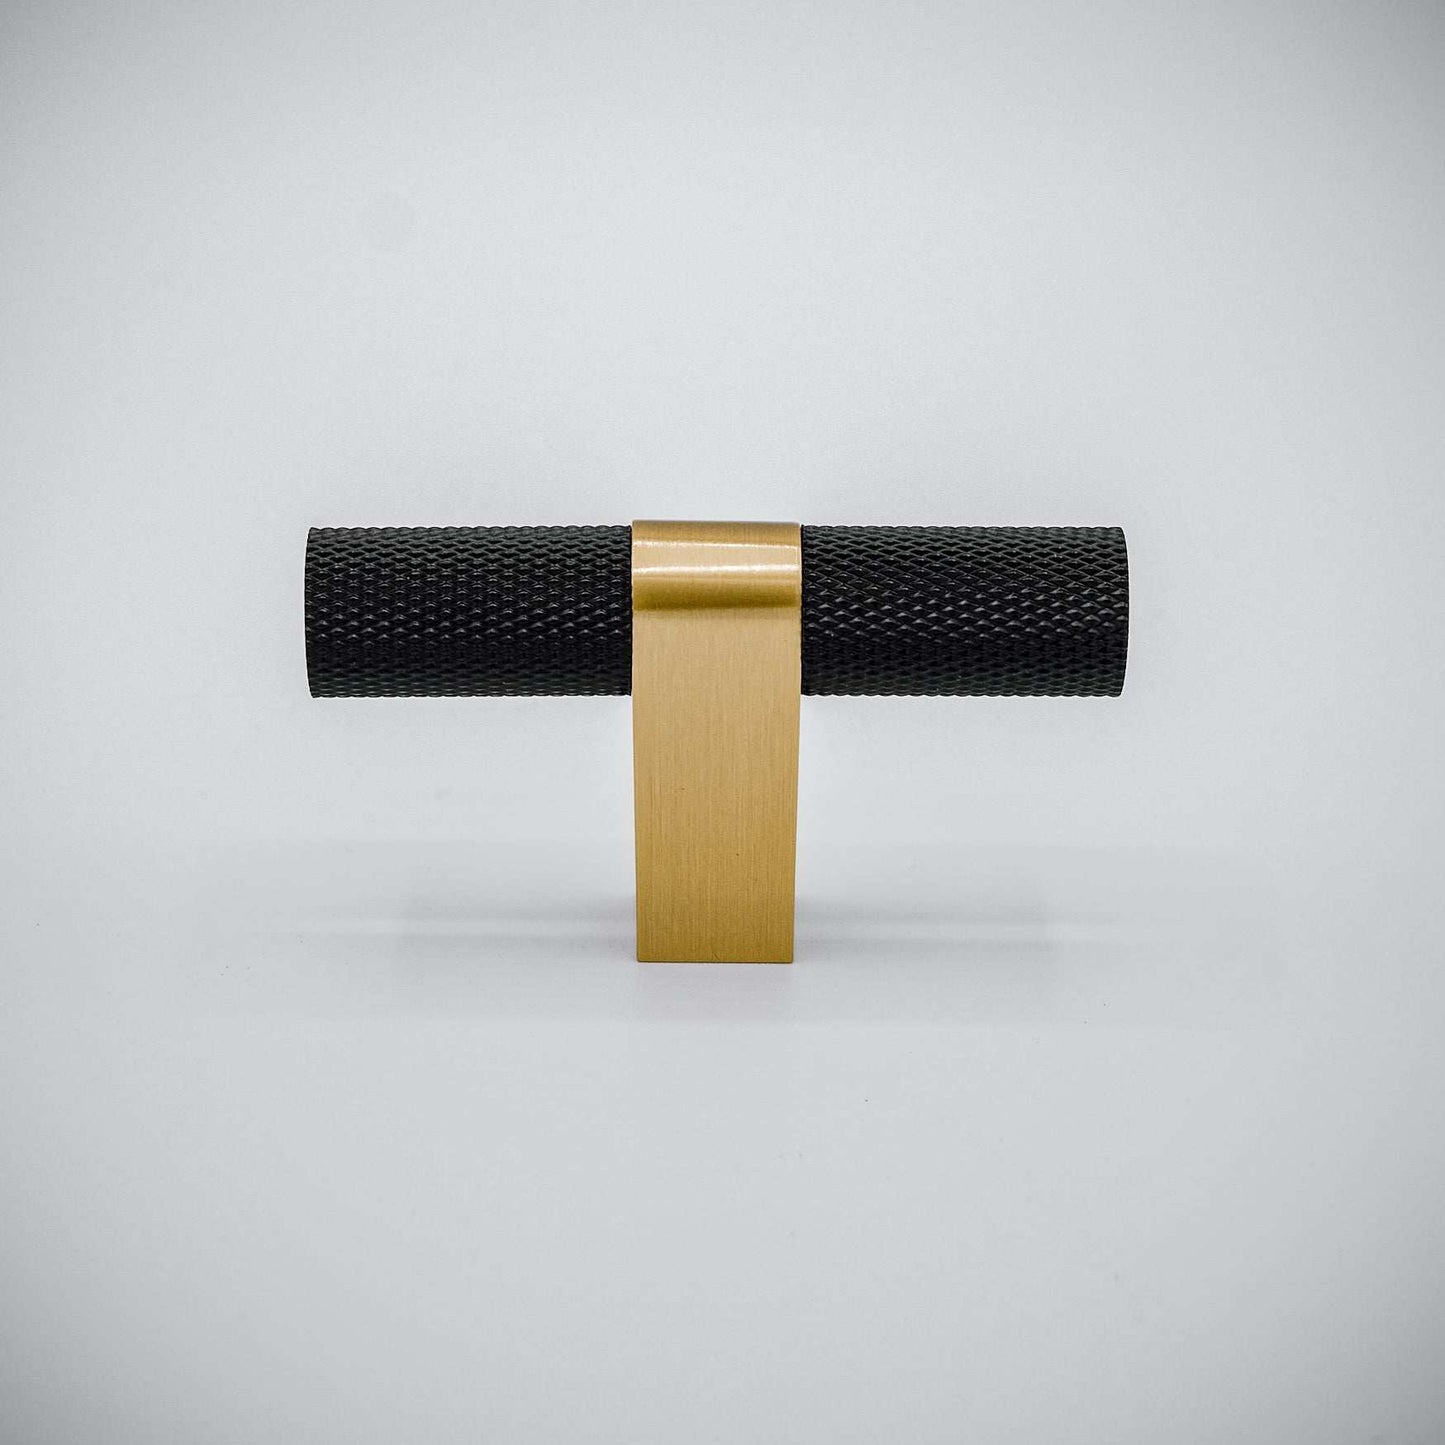 Bold, Black & Gold Knurled Solid Brass Knob


Go BOLD in your home! 
Our Bold, Black and "gold" cabinet knob brings a modern feel to your cabinetry. Its two-toned style is visually fresh, while its knurled teknobBold, Black & Gold Knurled Solid Brass Knob